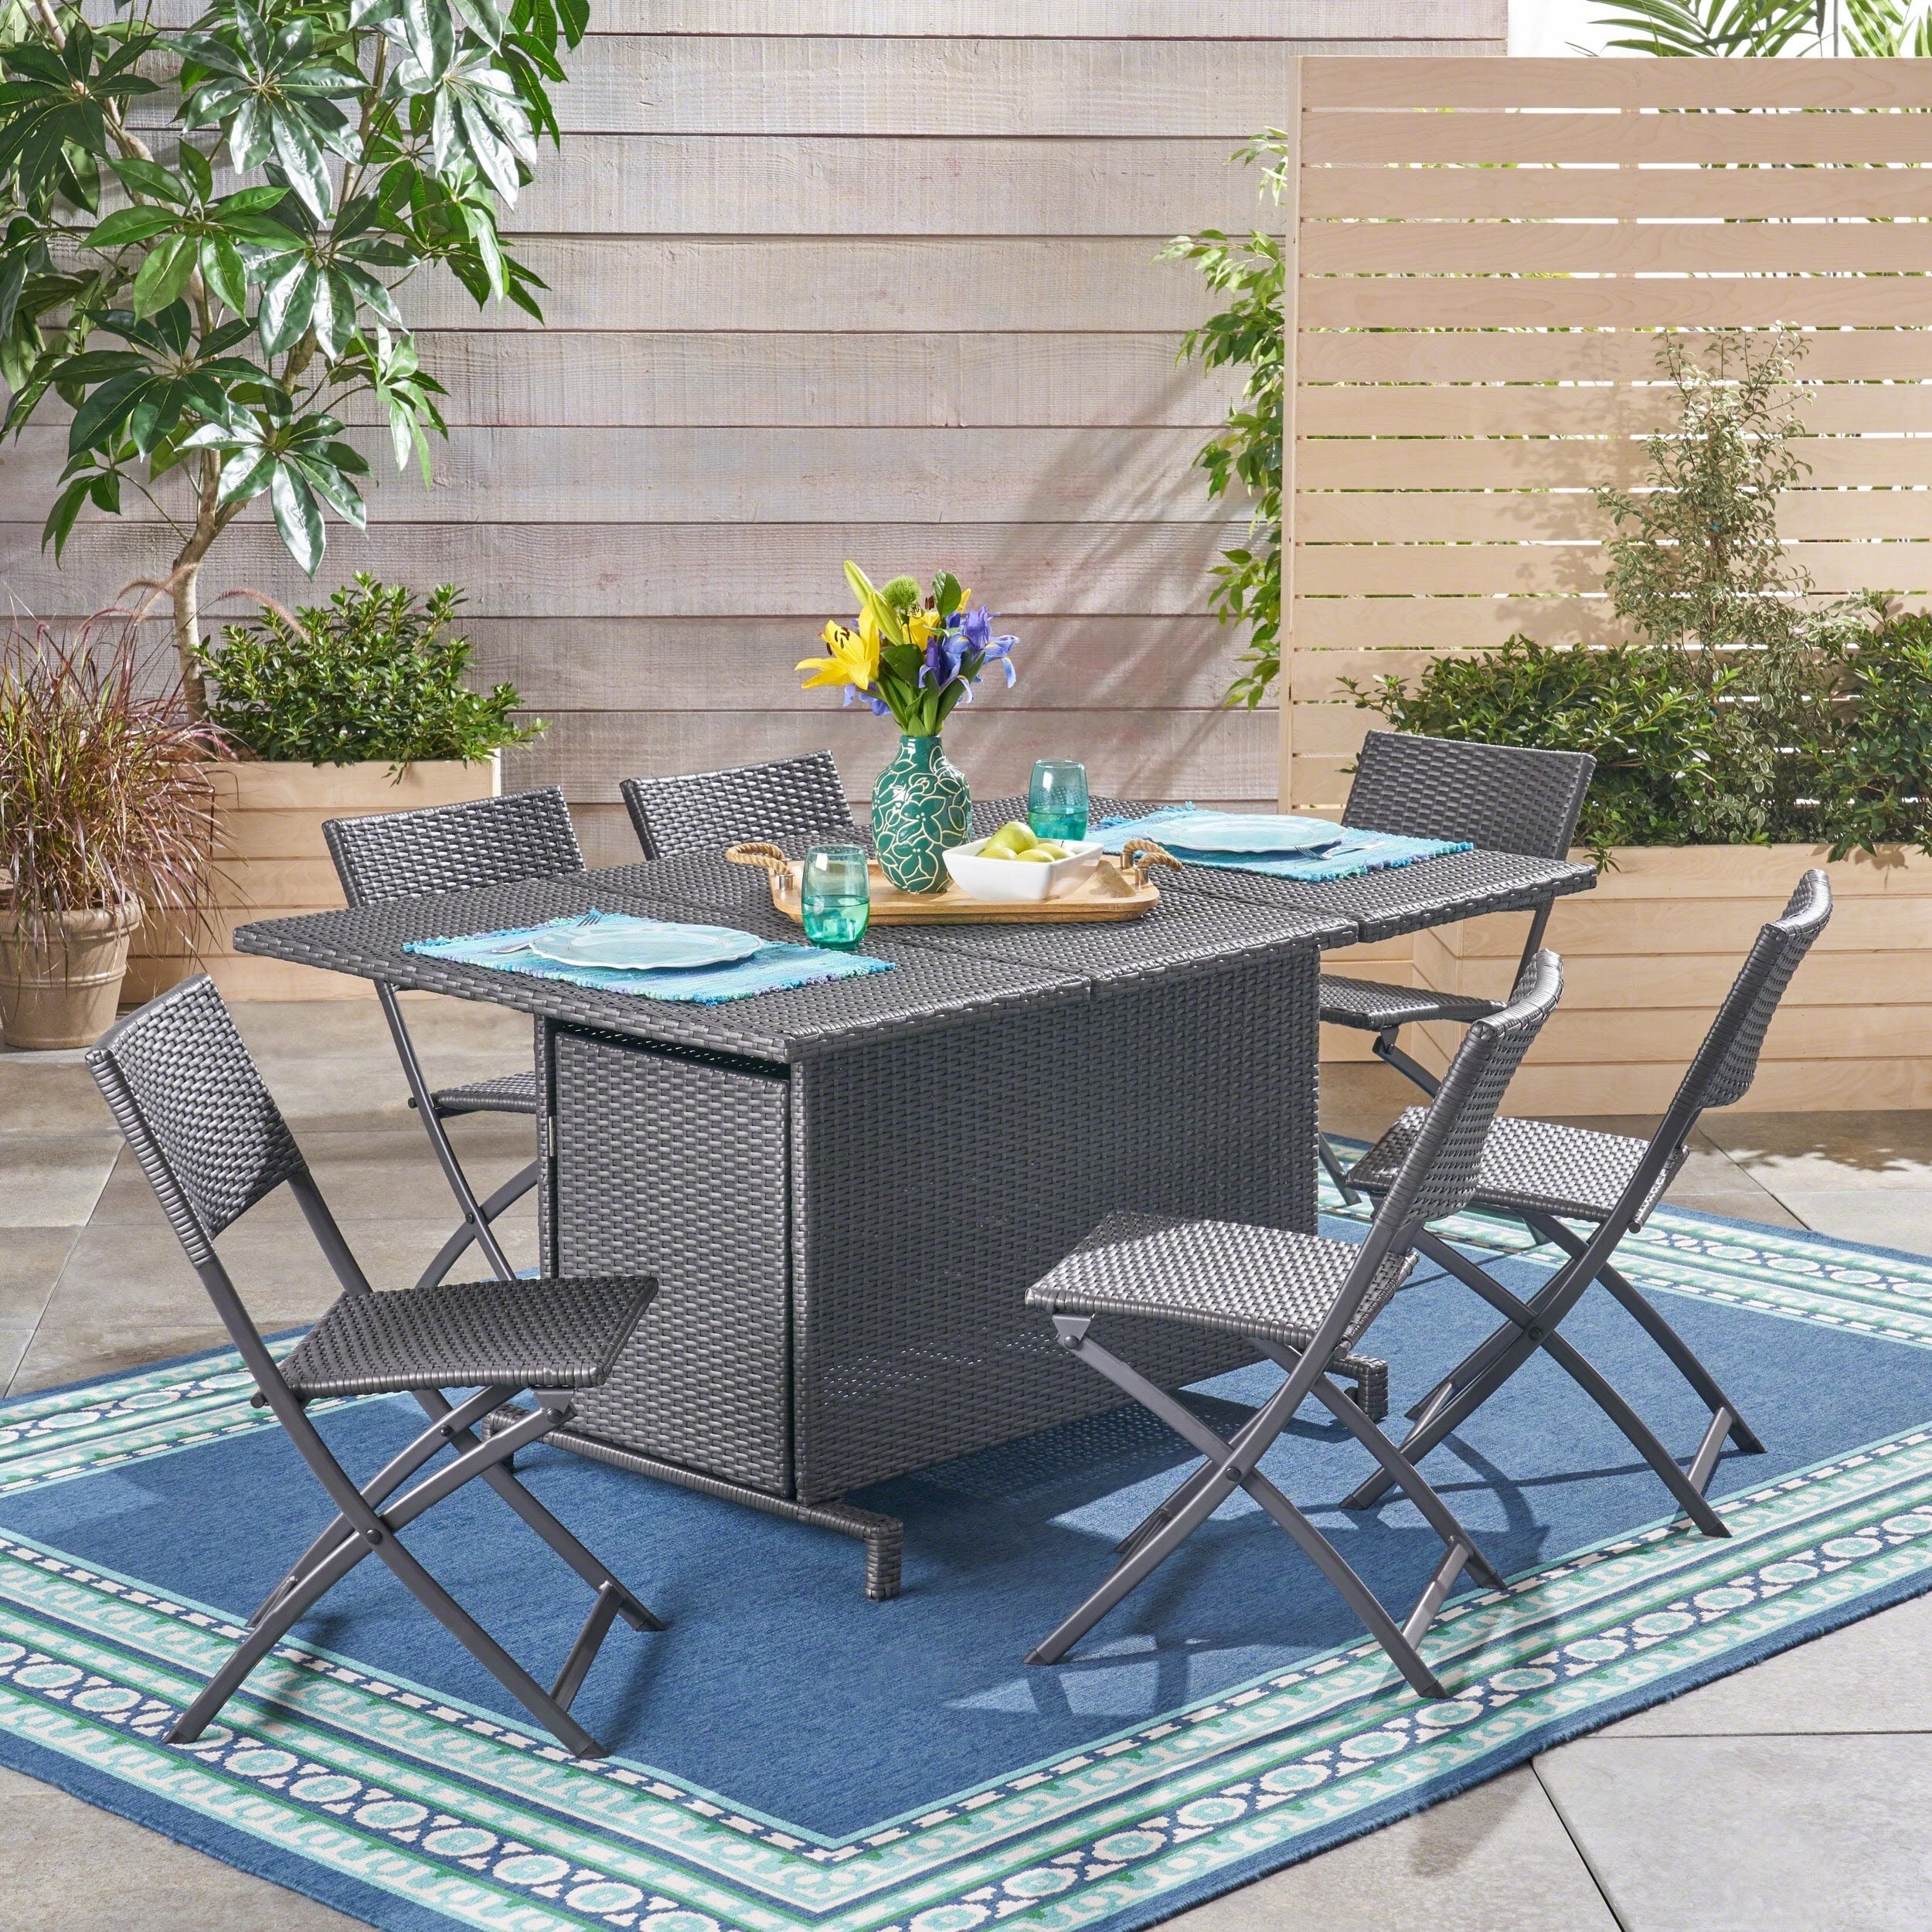 Maldives Outdoor 7 Piece Foldable Dining Set By Christopher Knight Home